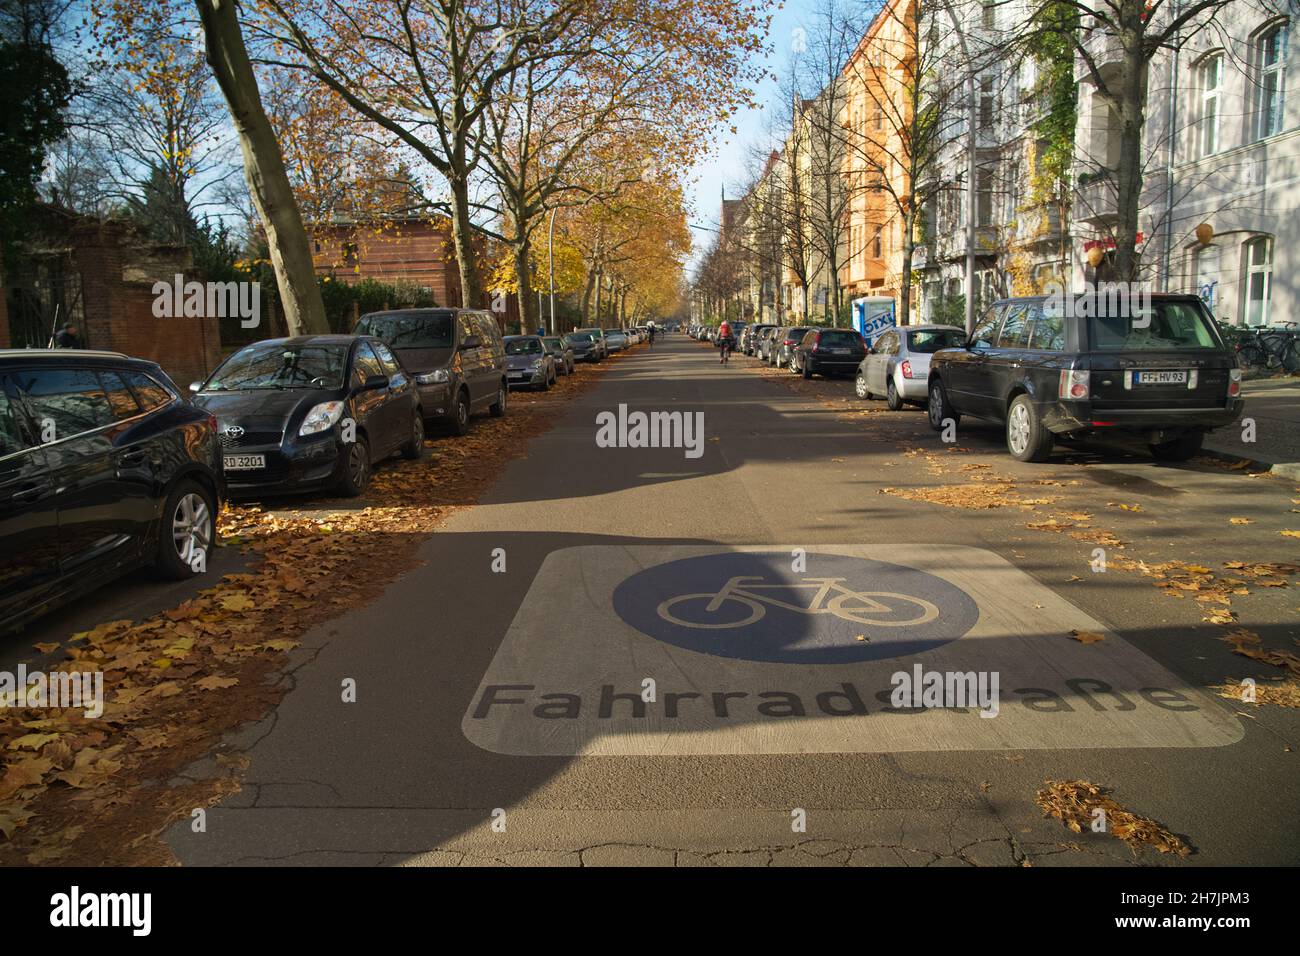 BERLIN, GERMANY - NOVEMBER 10, 2021: Bergmannstrasse with large sign Bicycle Street Fahrradstrasse printed on the asphalt on a sunny autumn day. Cemet Stock Photo